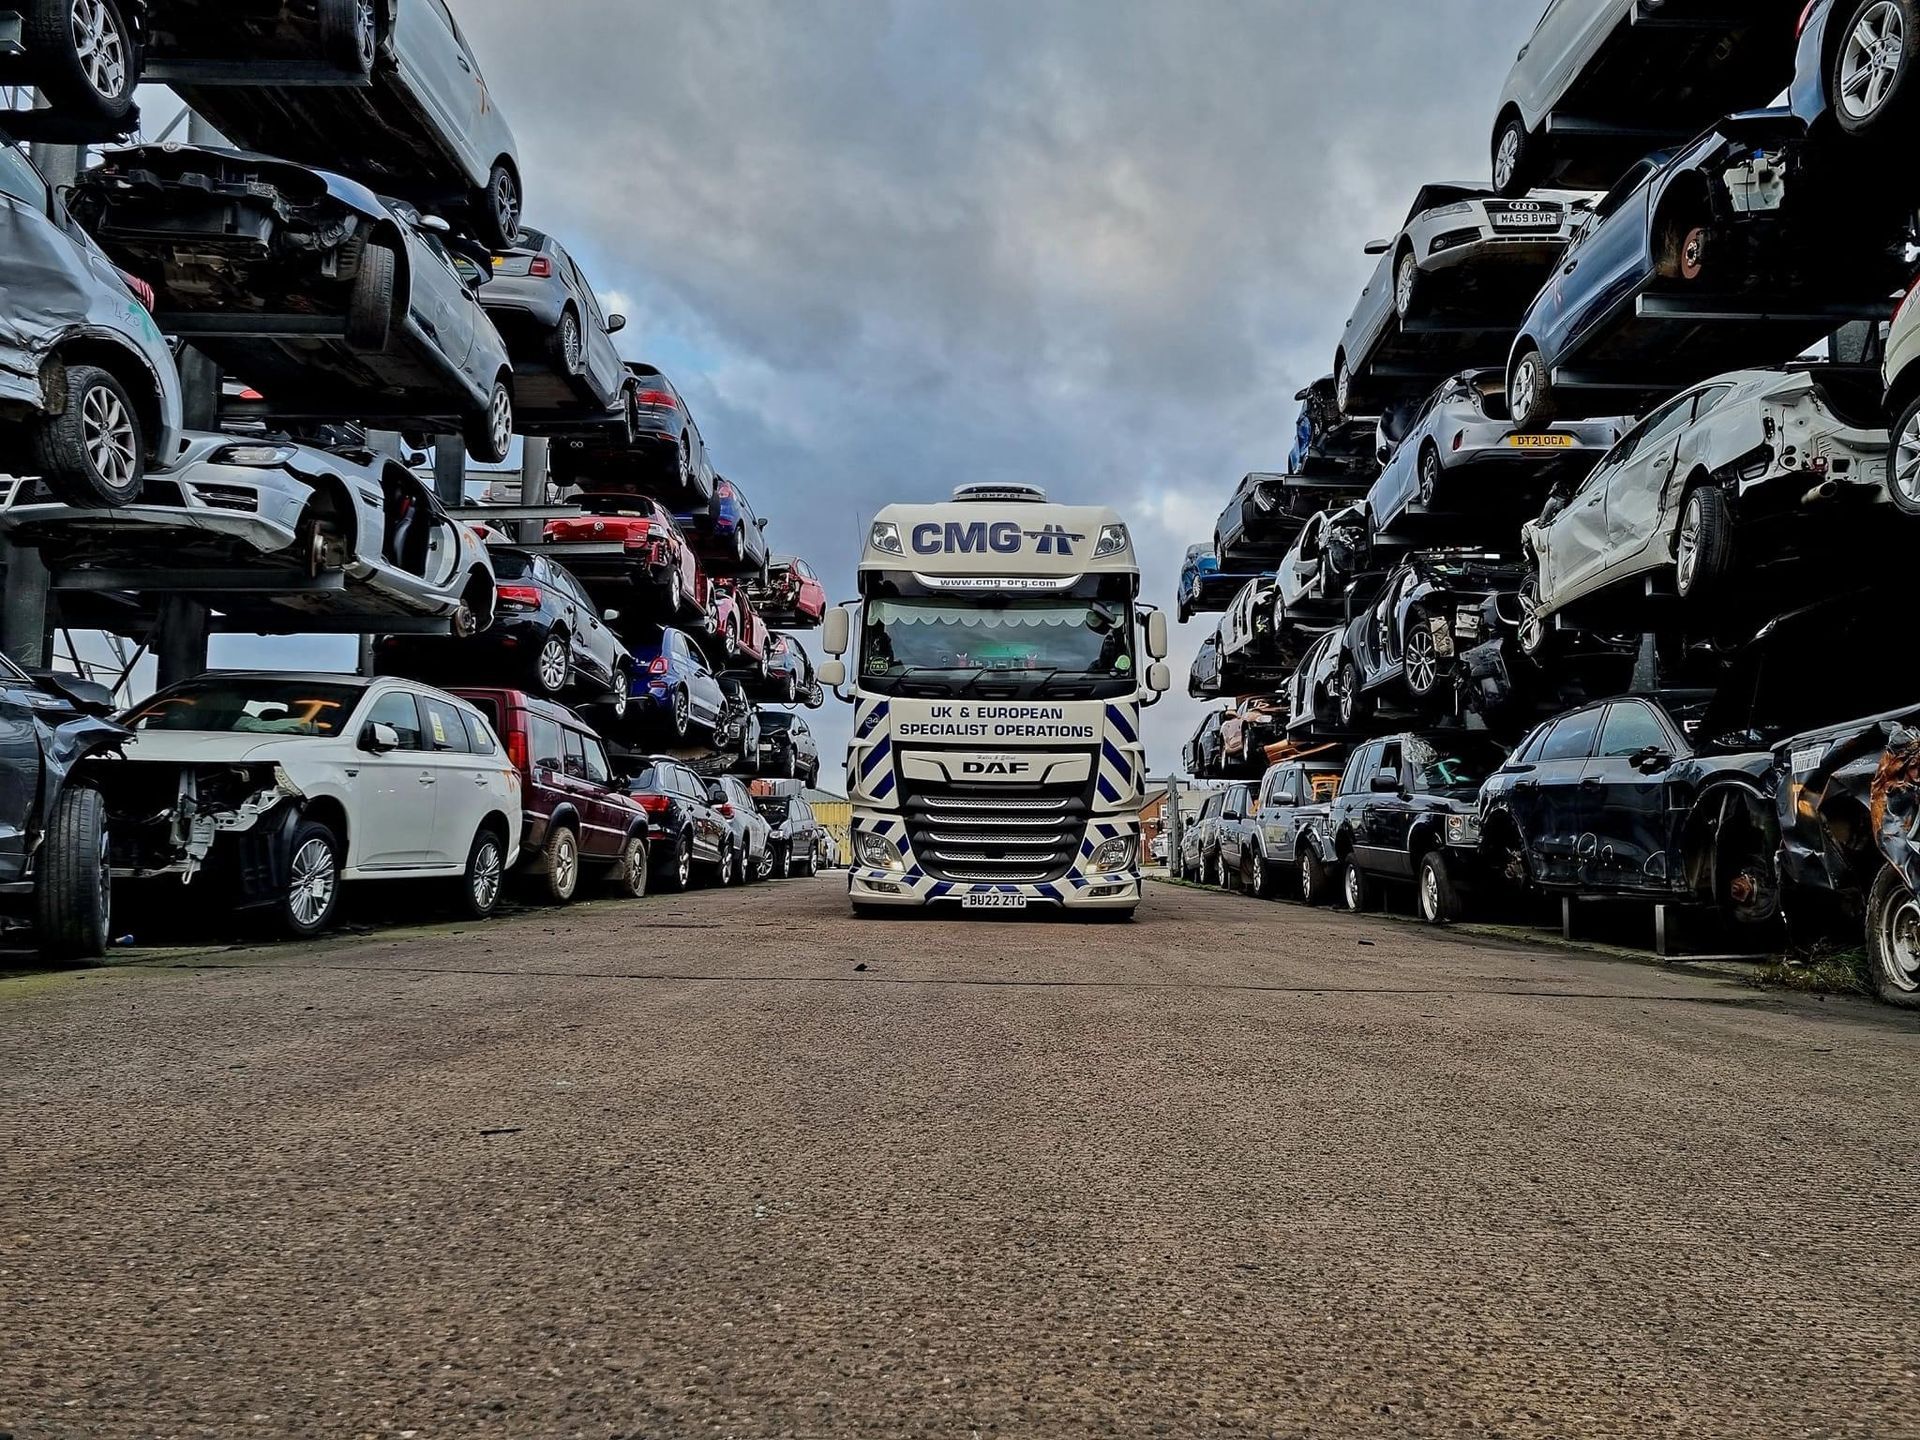 A truck is driving through a parking lot filled with lots of cars.